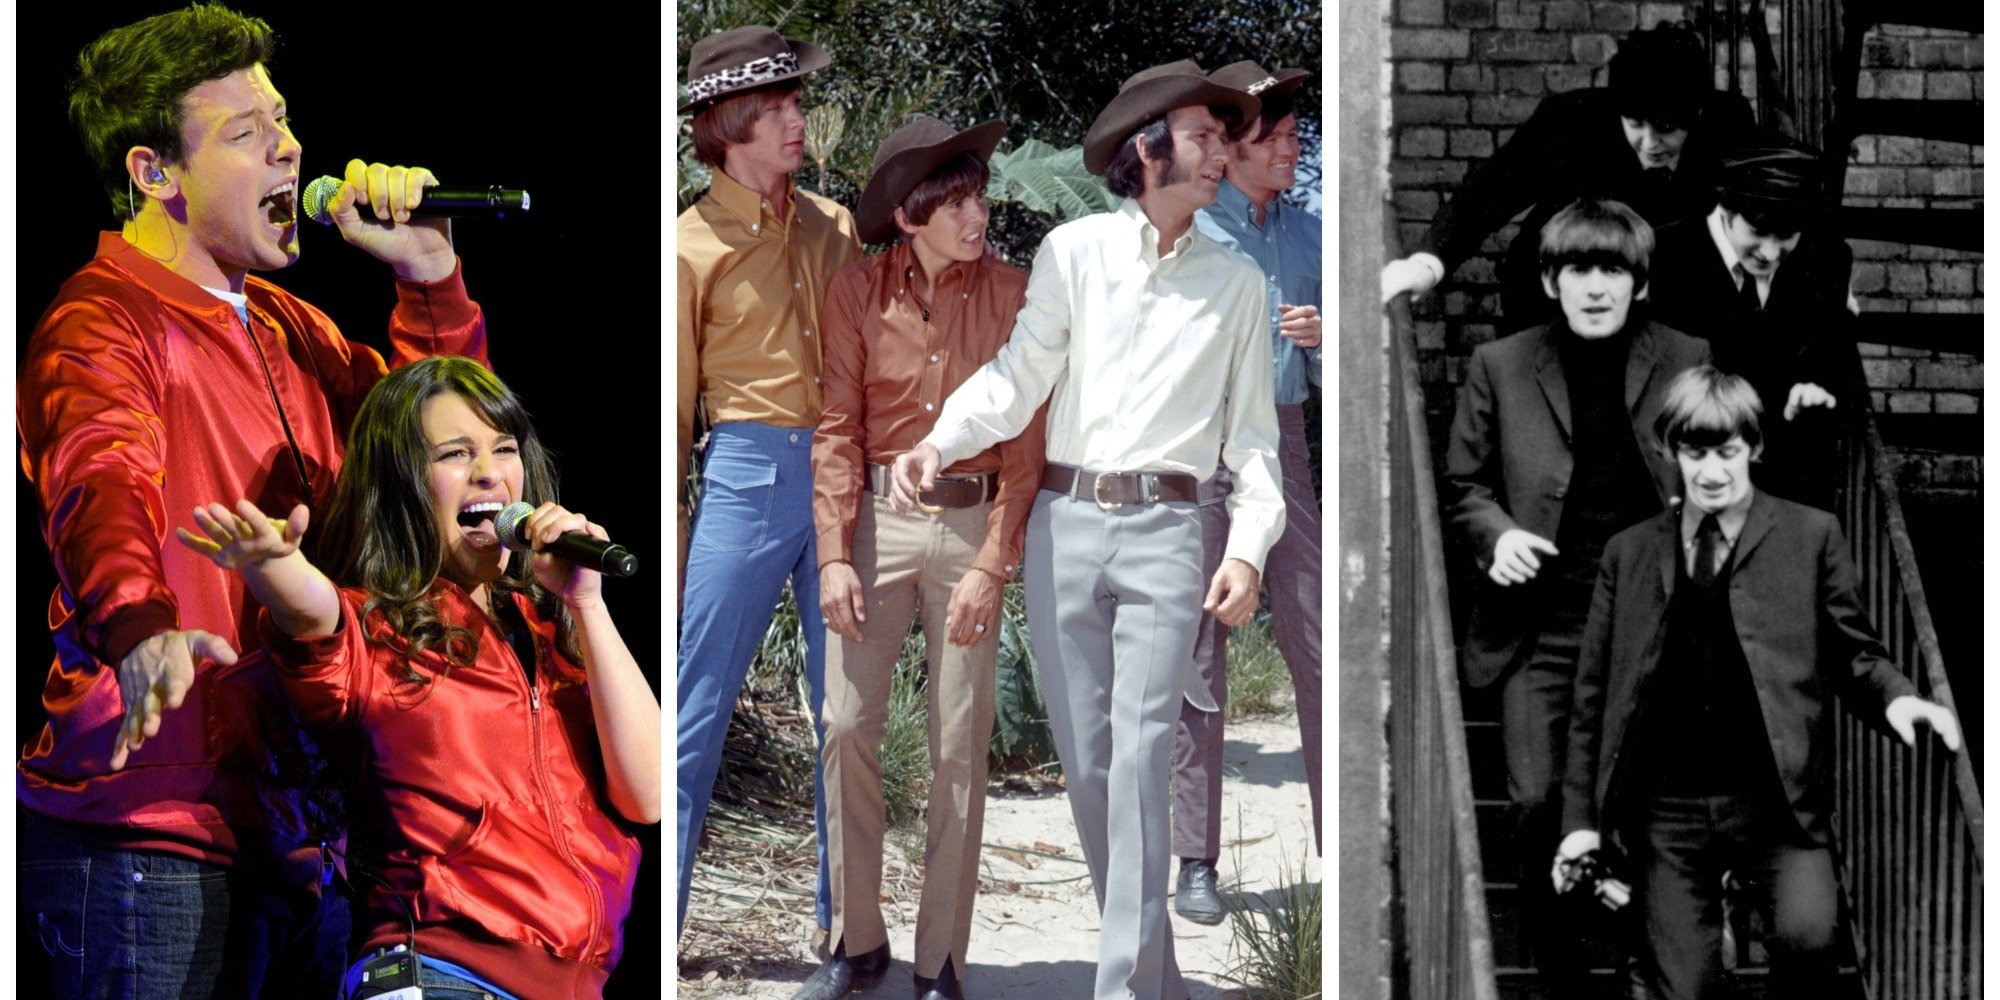 The cast of Glee, the Monkees and the Beatles in a photo montage.